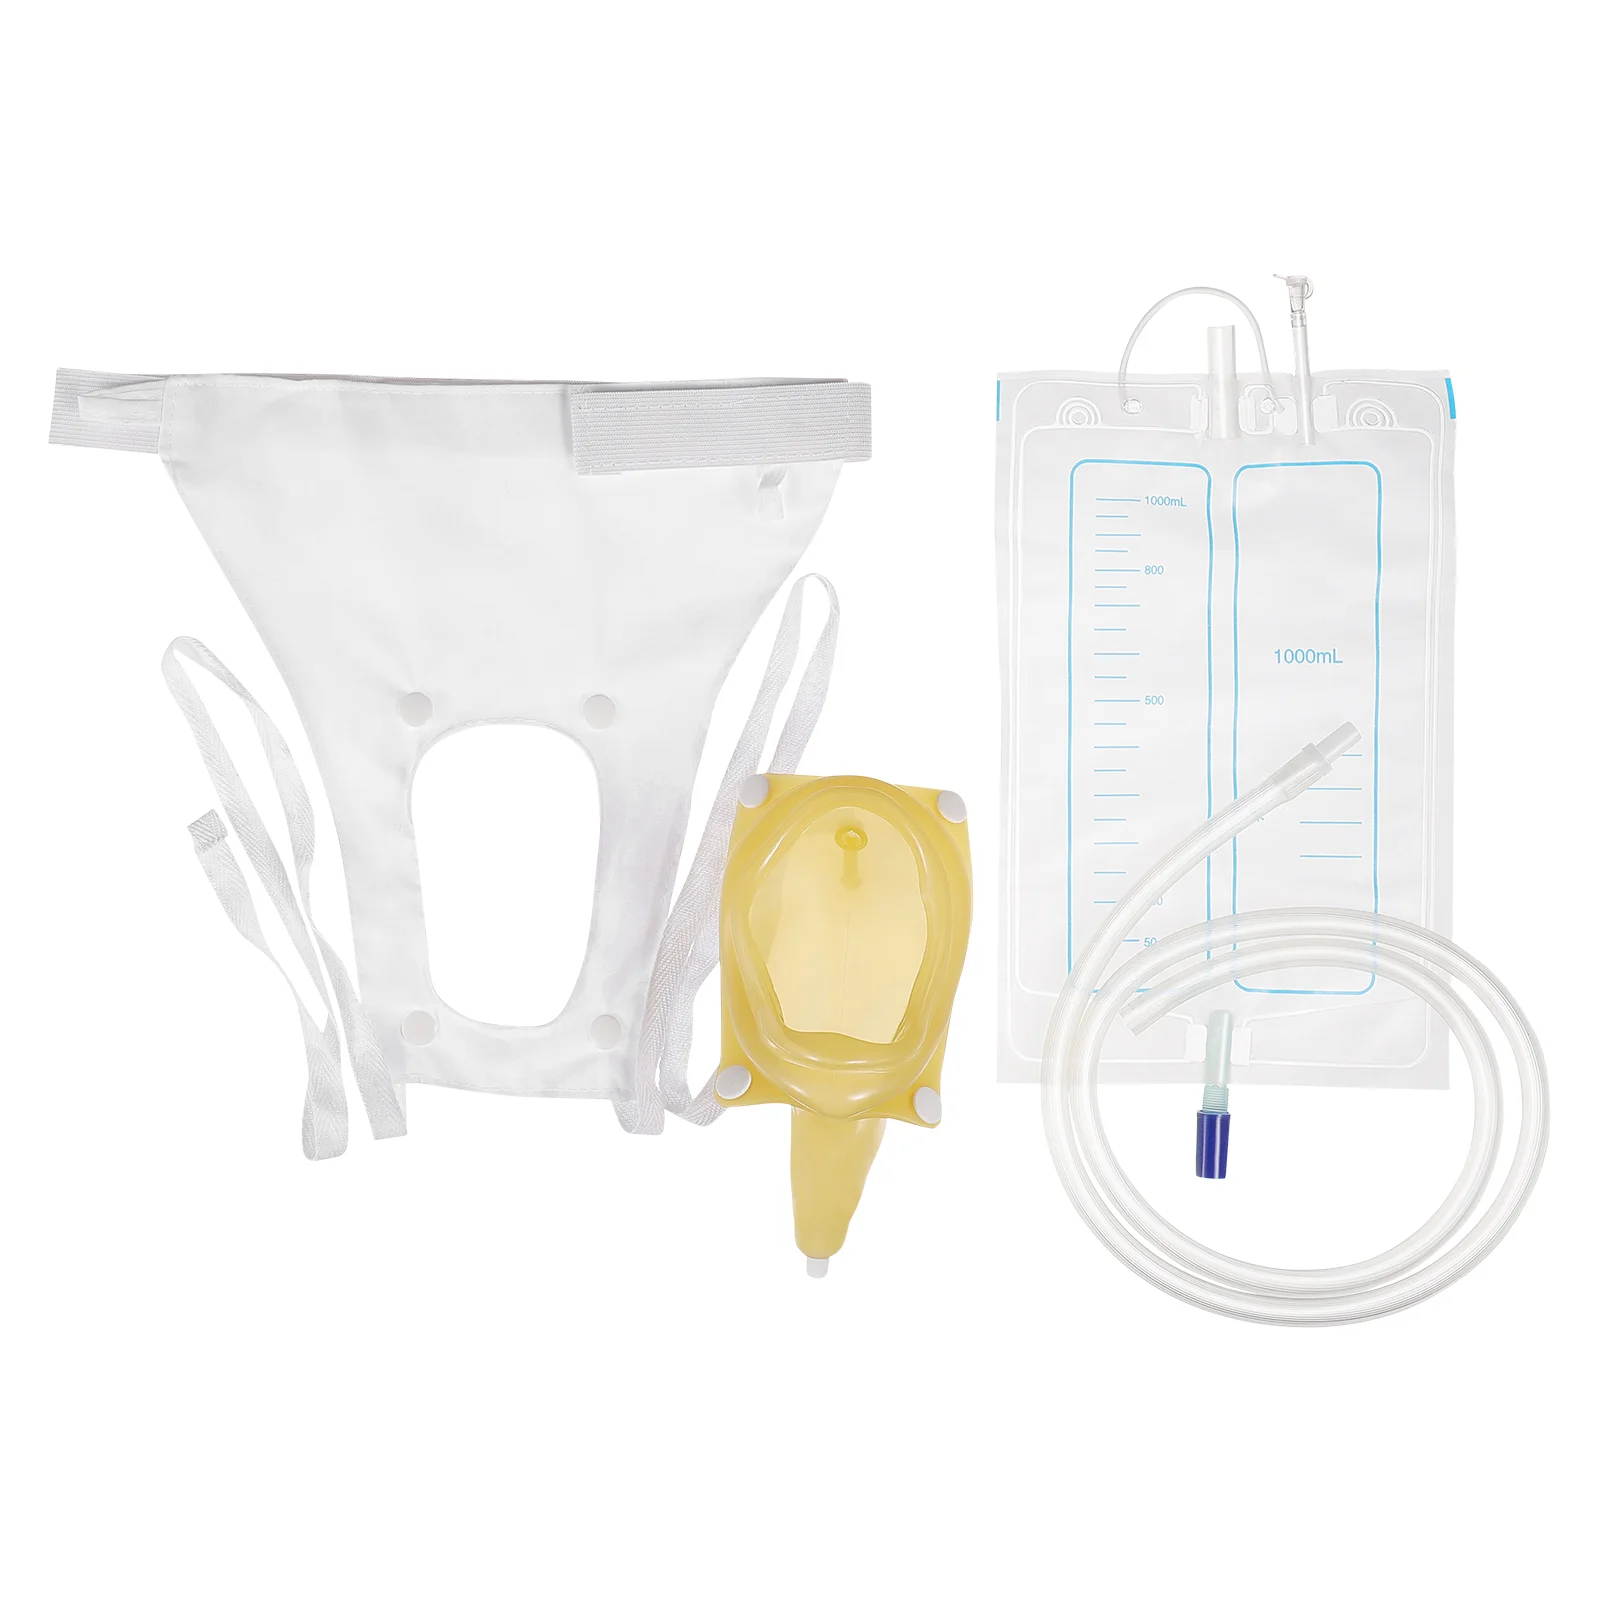 Urinal External Urine Management The Female Anatomy Emergency Portable Urinary Drainage Collector Women Wearable Collection